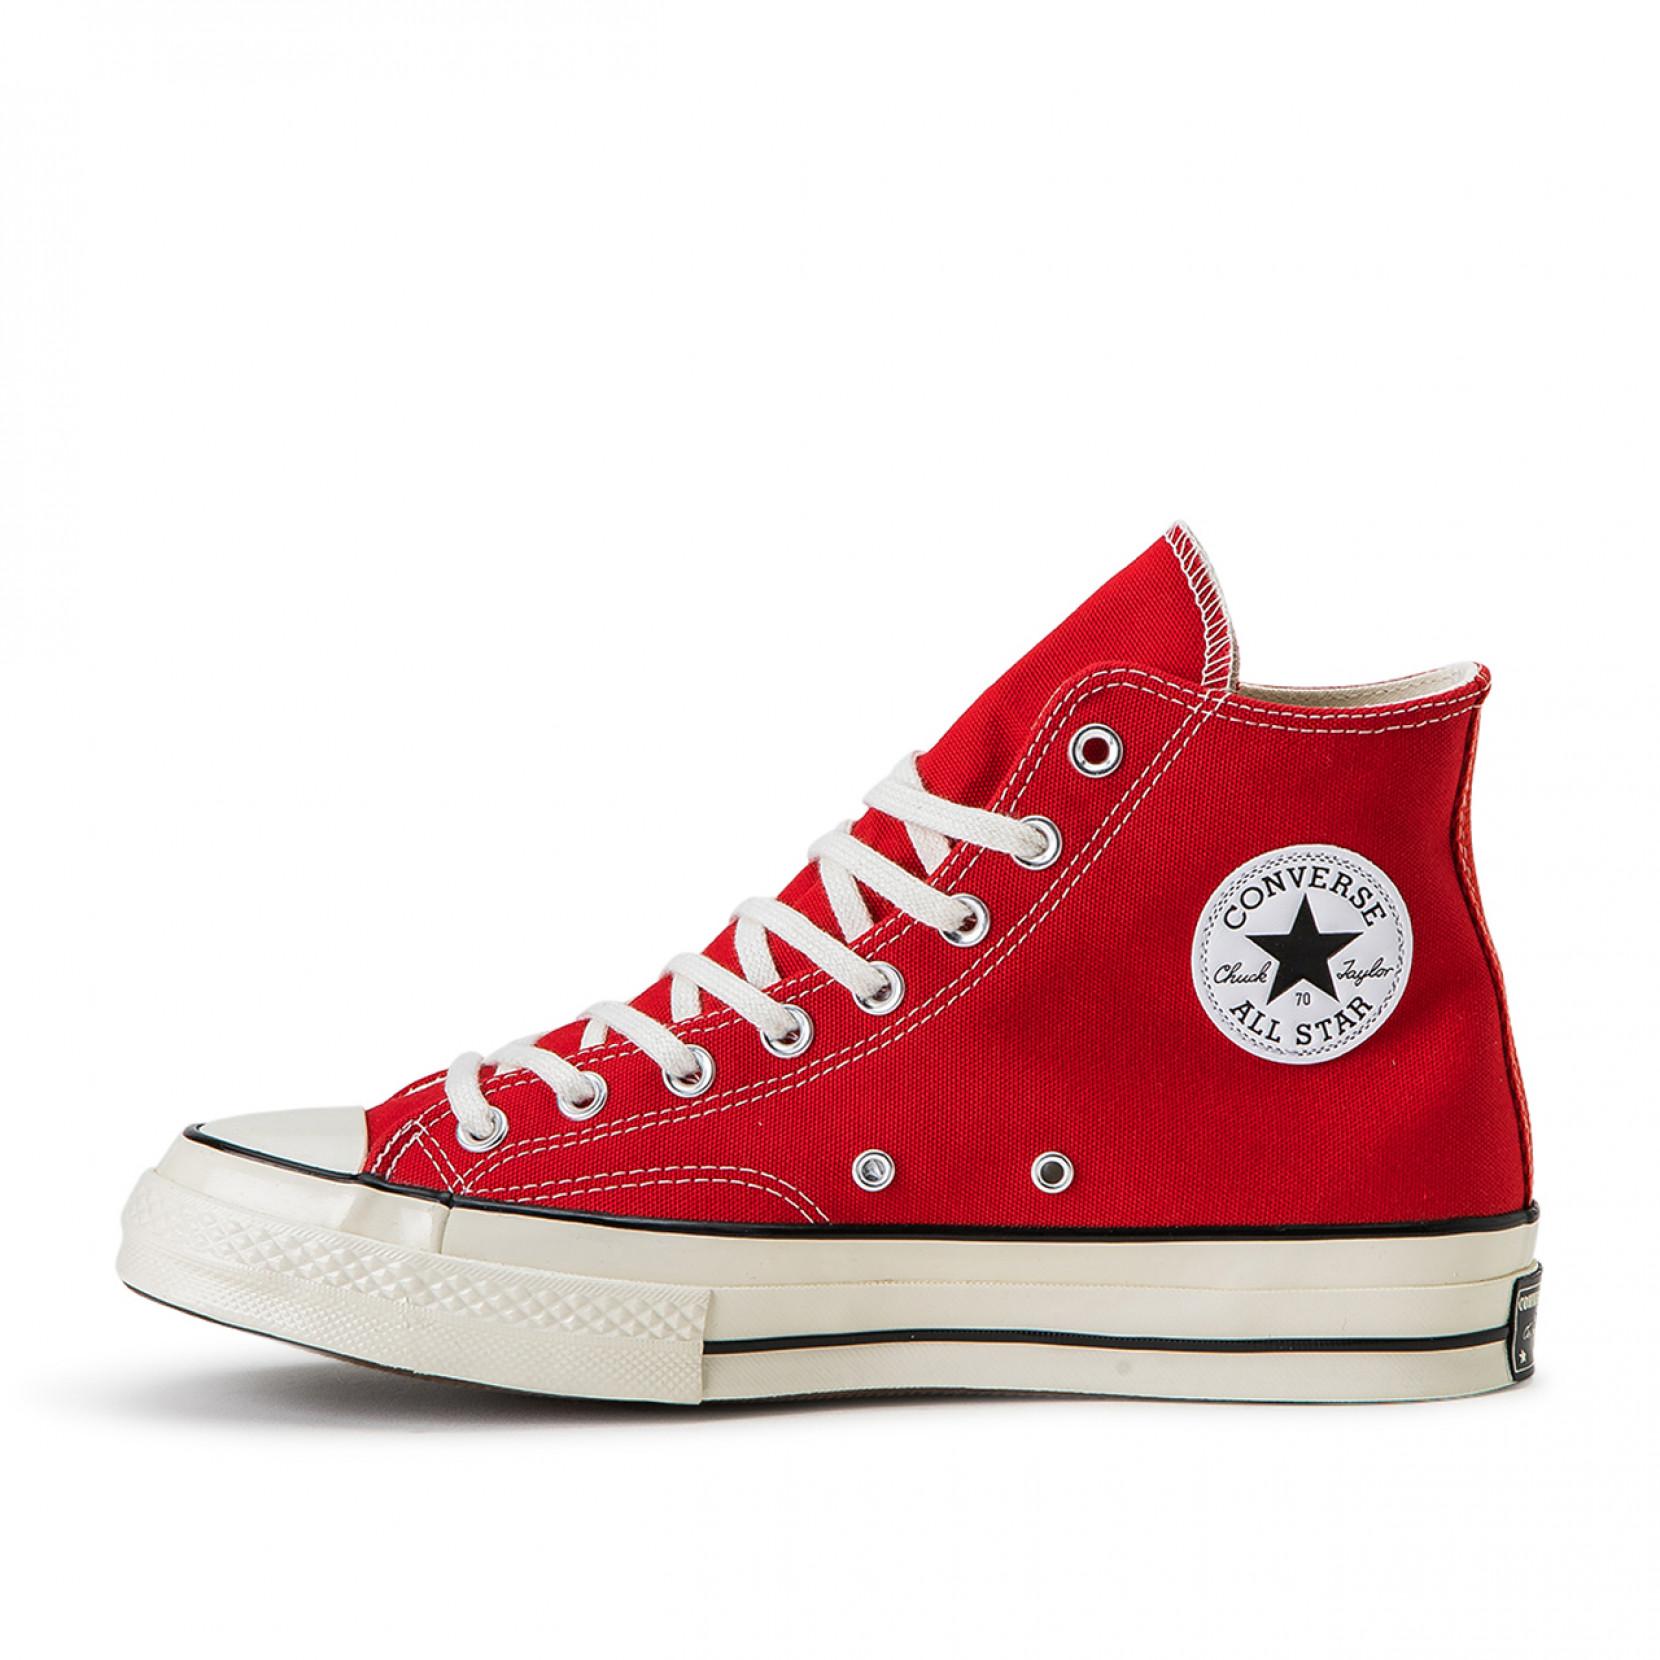 Converse Canvas 70's Chuck Taylor Hi (164944c) in Red for Men - Lyst